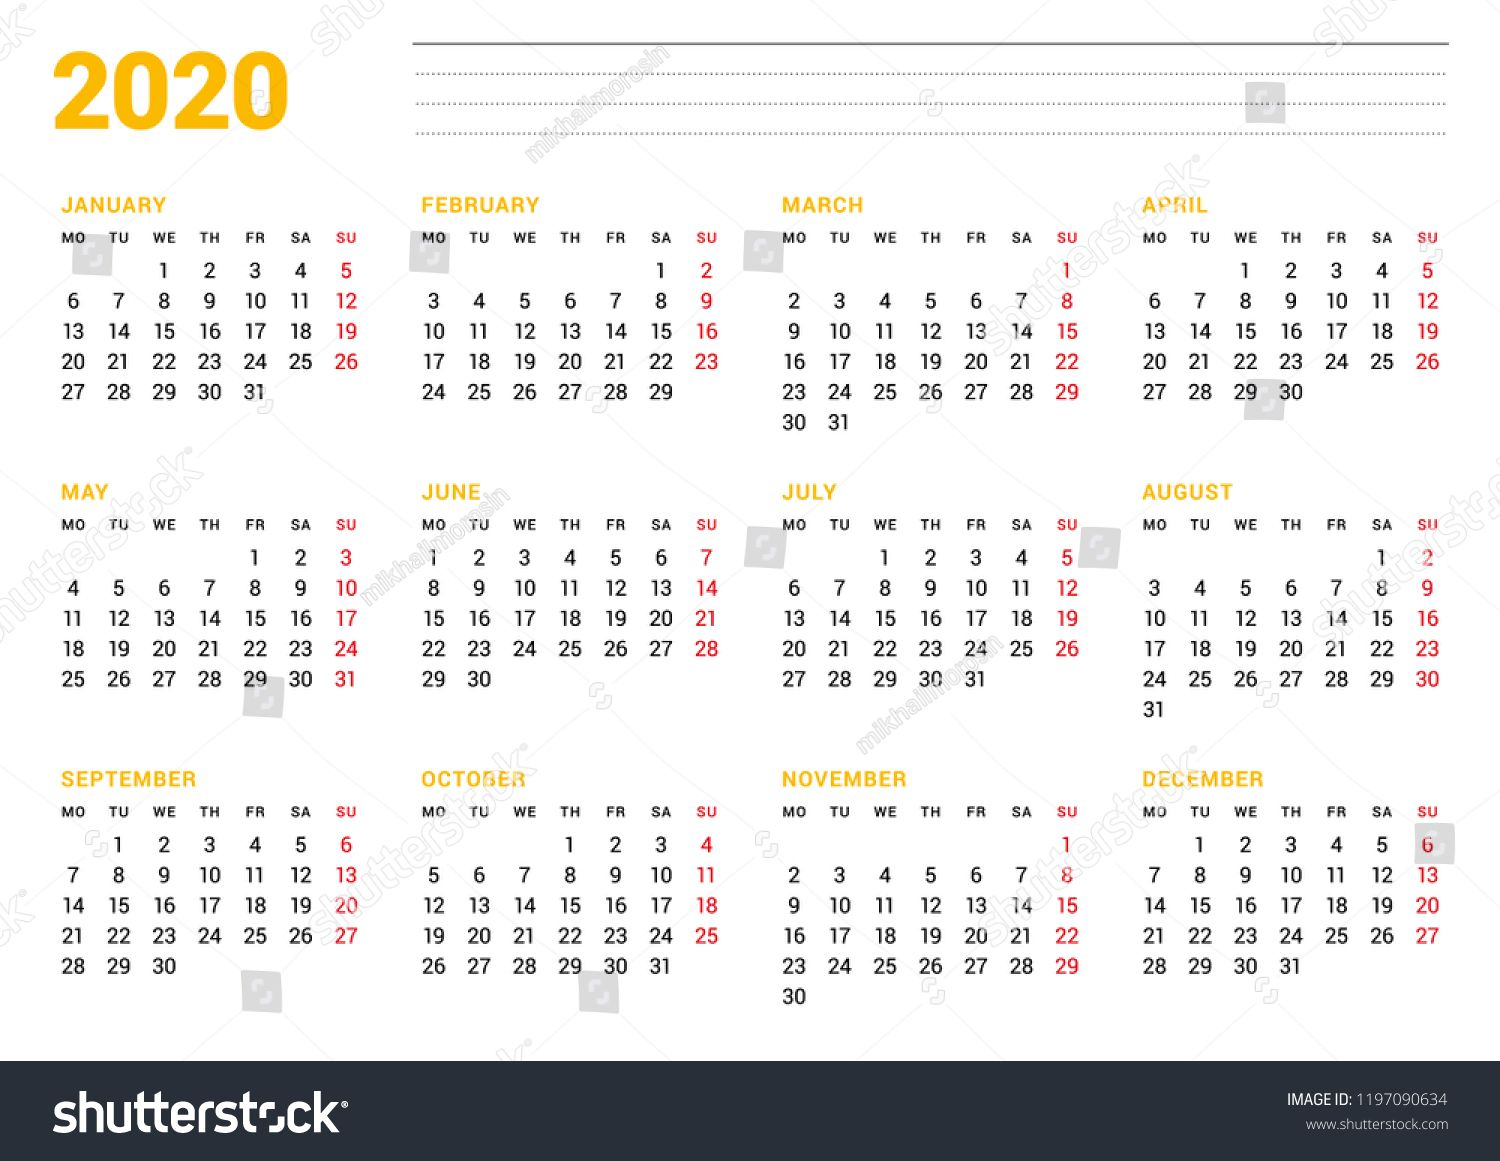 Calendar Template For 2020 Year. Stationery Design. Week